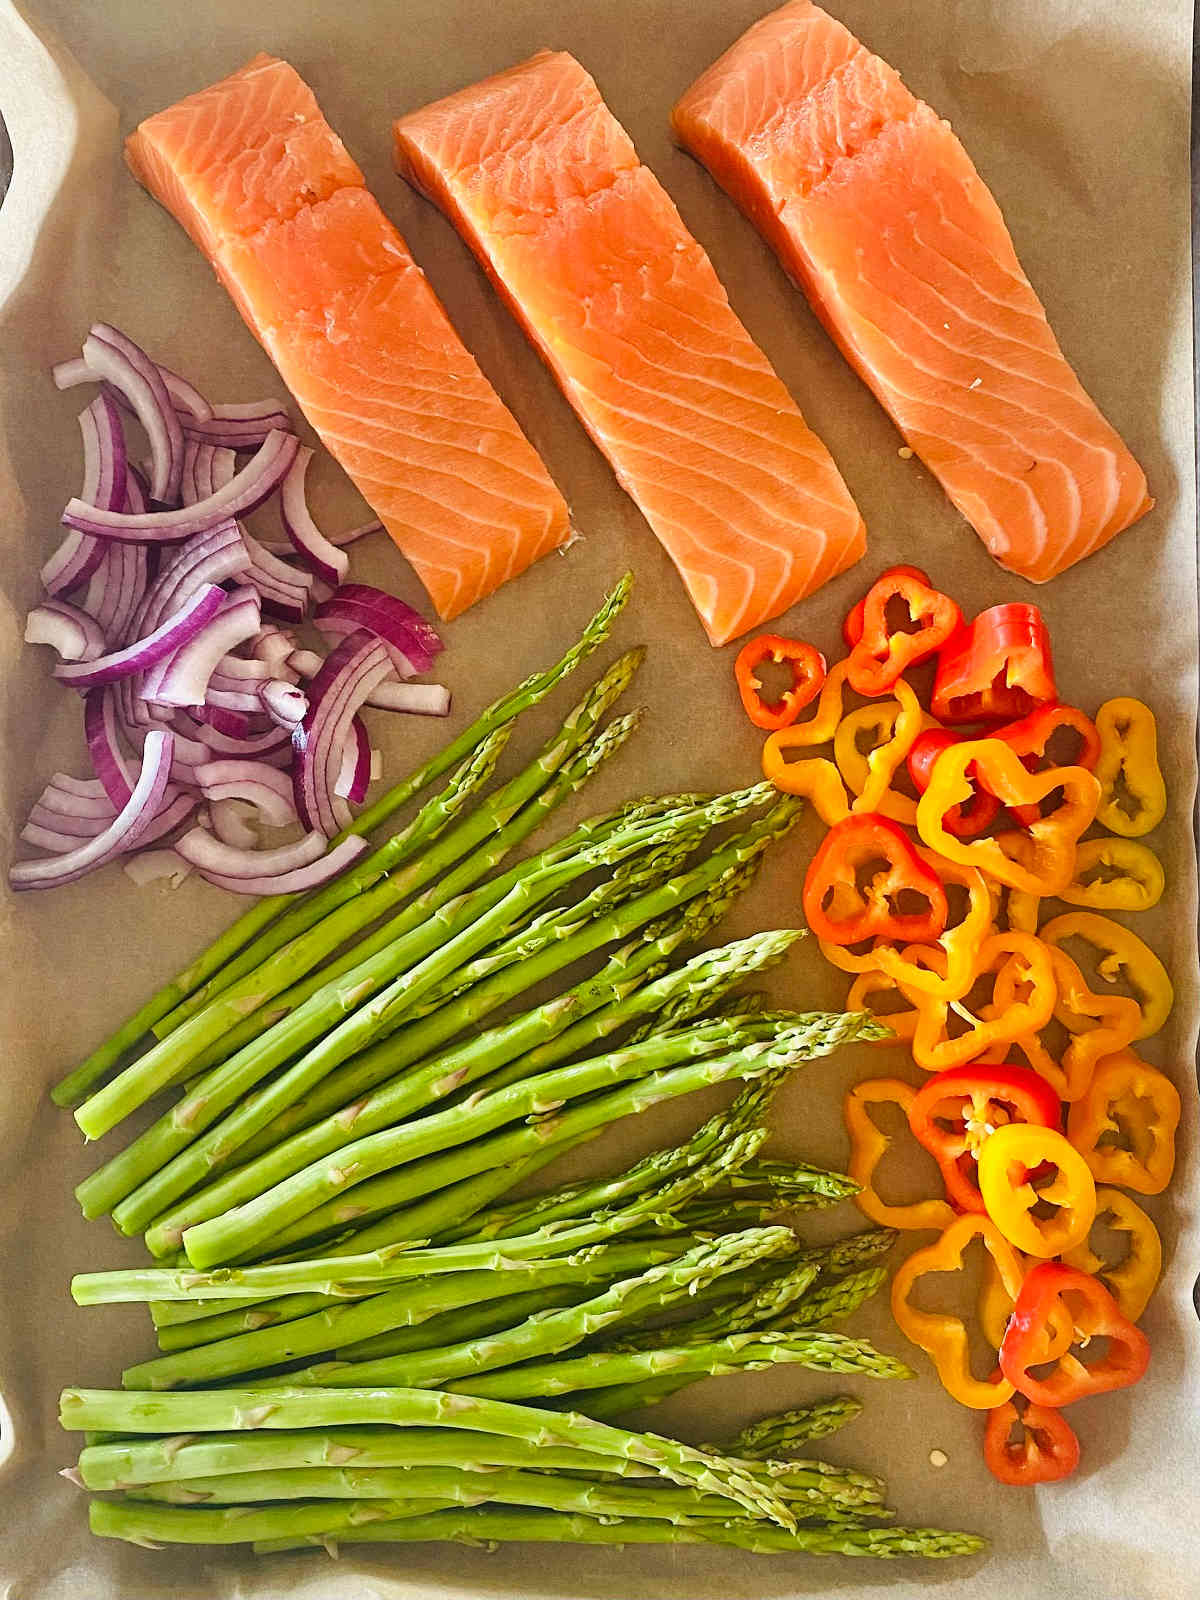 baked salmon and vegetables on a sheet pan.